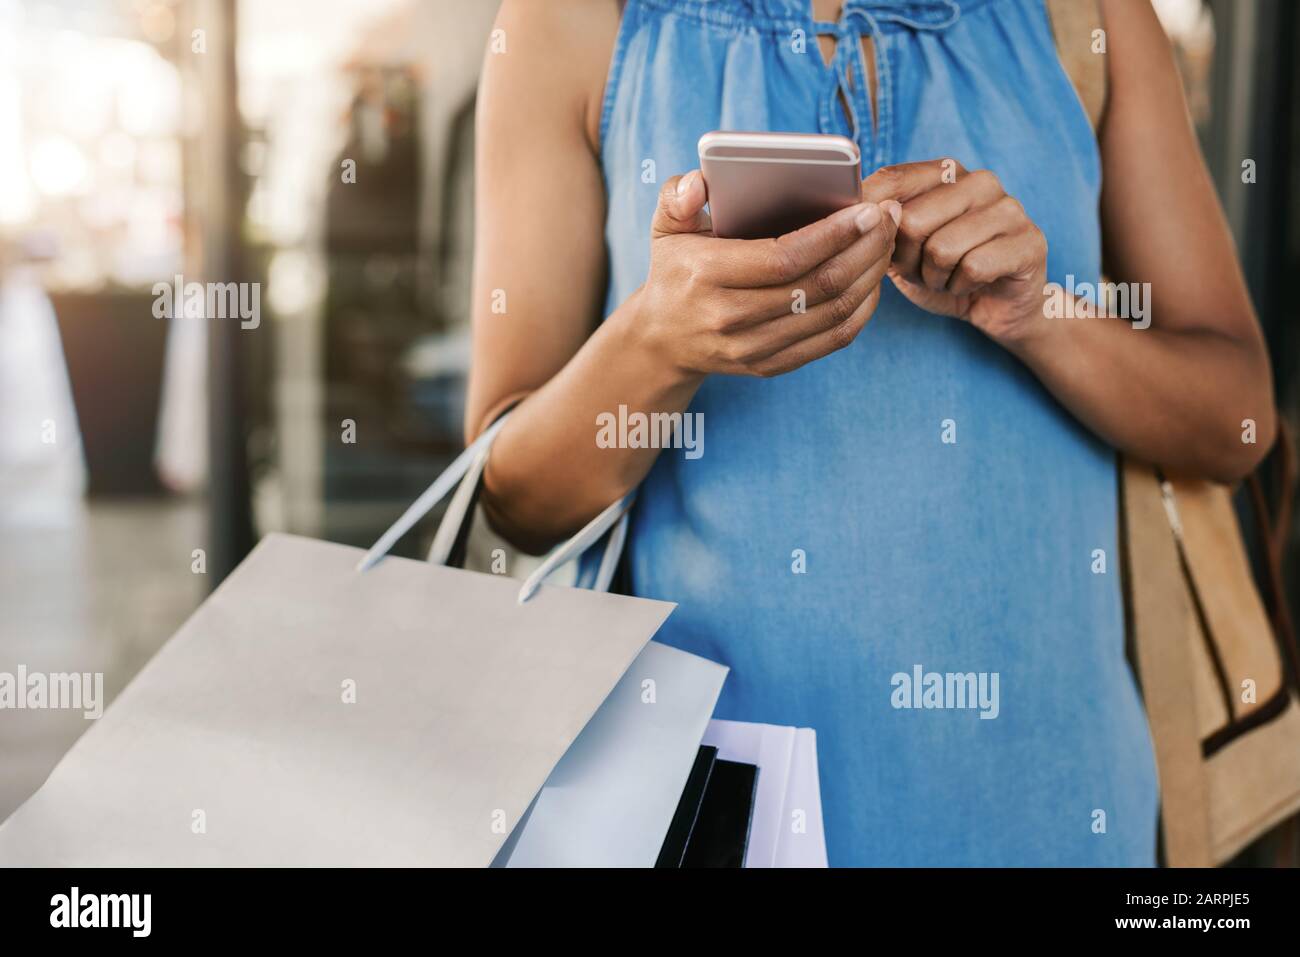 Woman using her cellphone while out clothes shopping Stock Photo